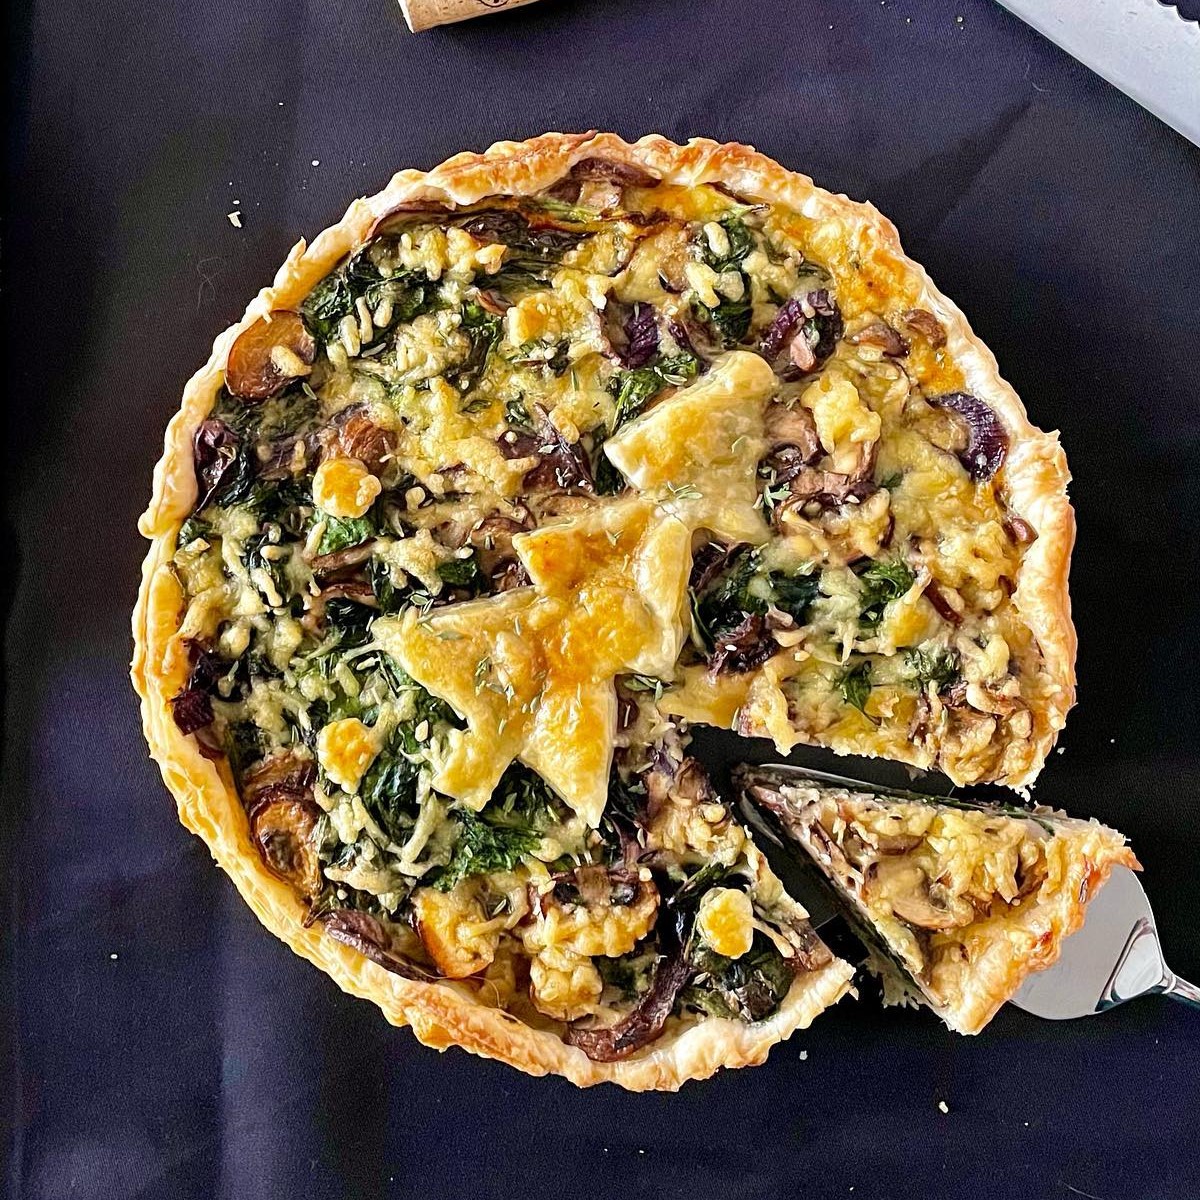 Vegetable Quiche With Chestnut Mushrooms, Spinach And Cheese. Isn't This A Nice Christmas Dish?